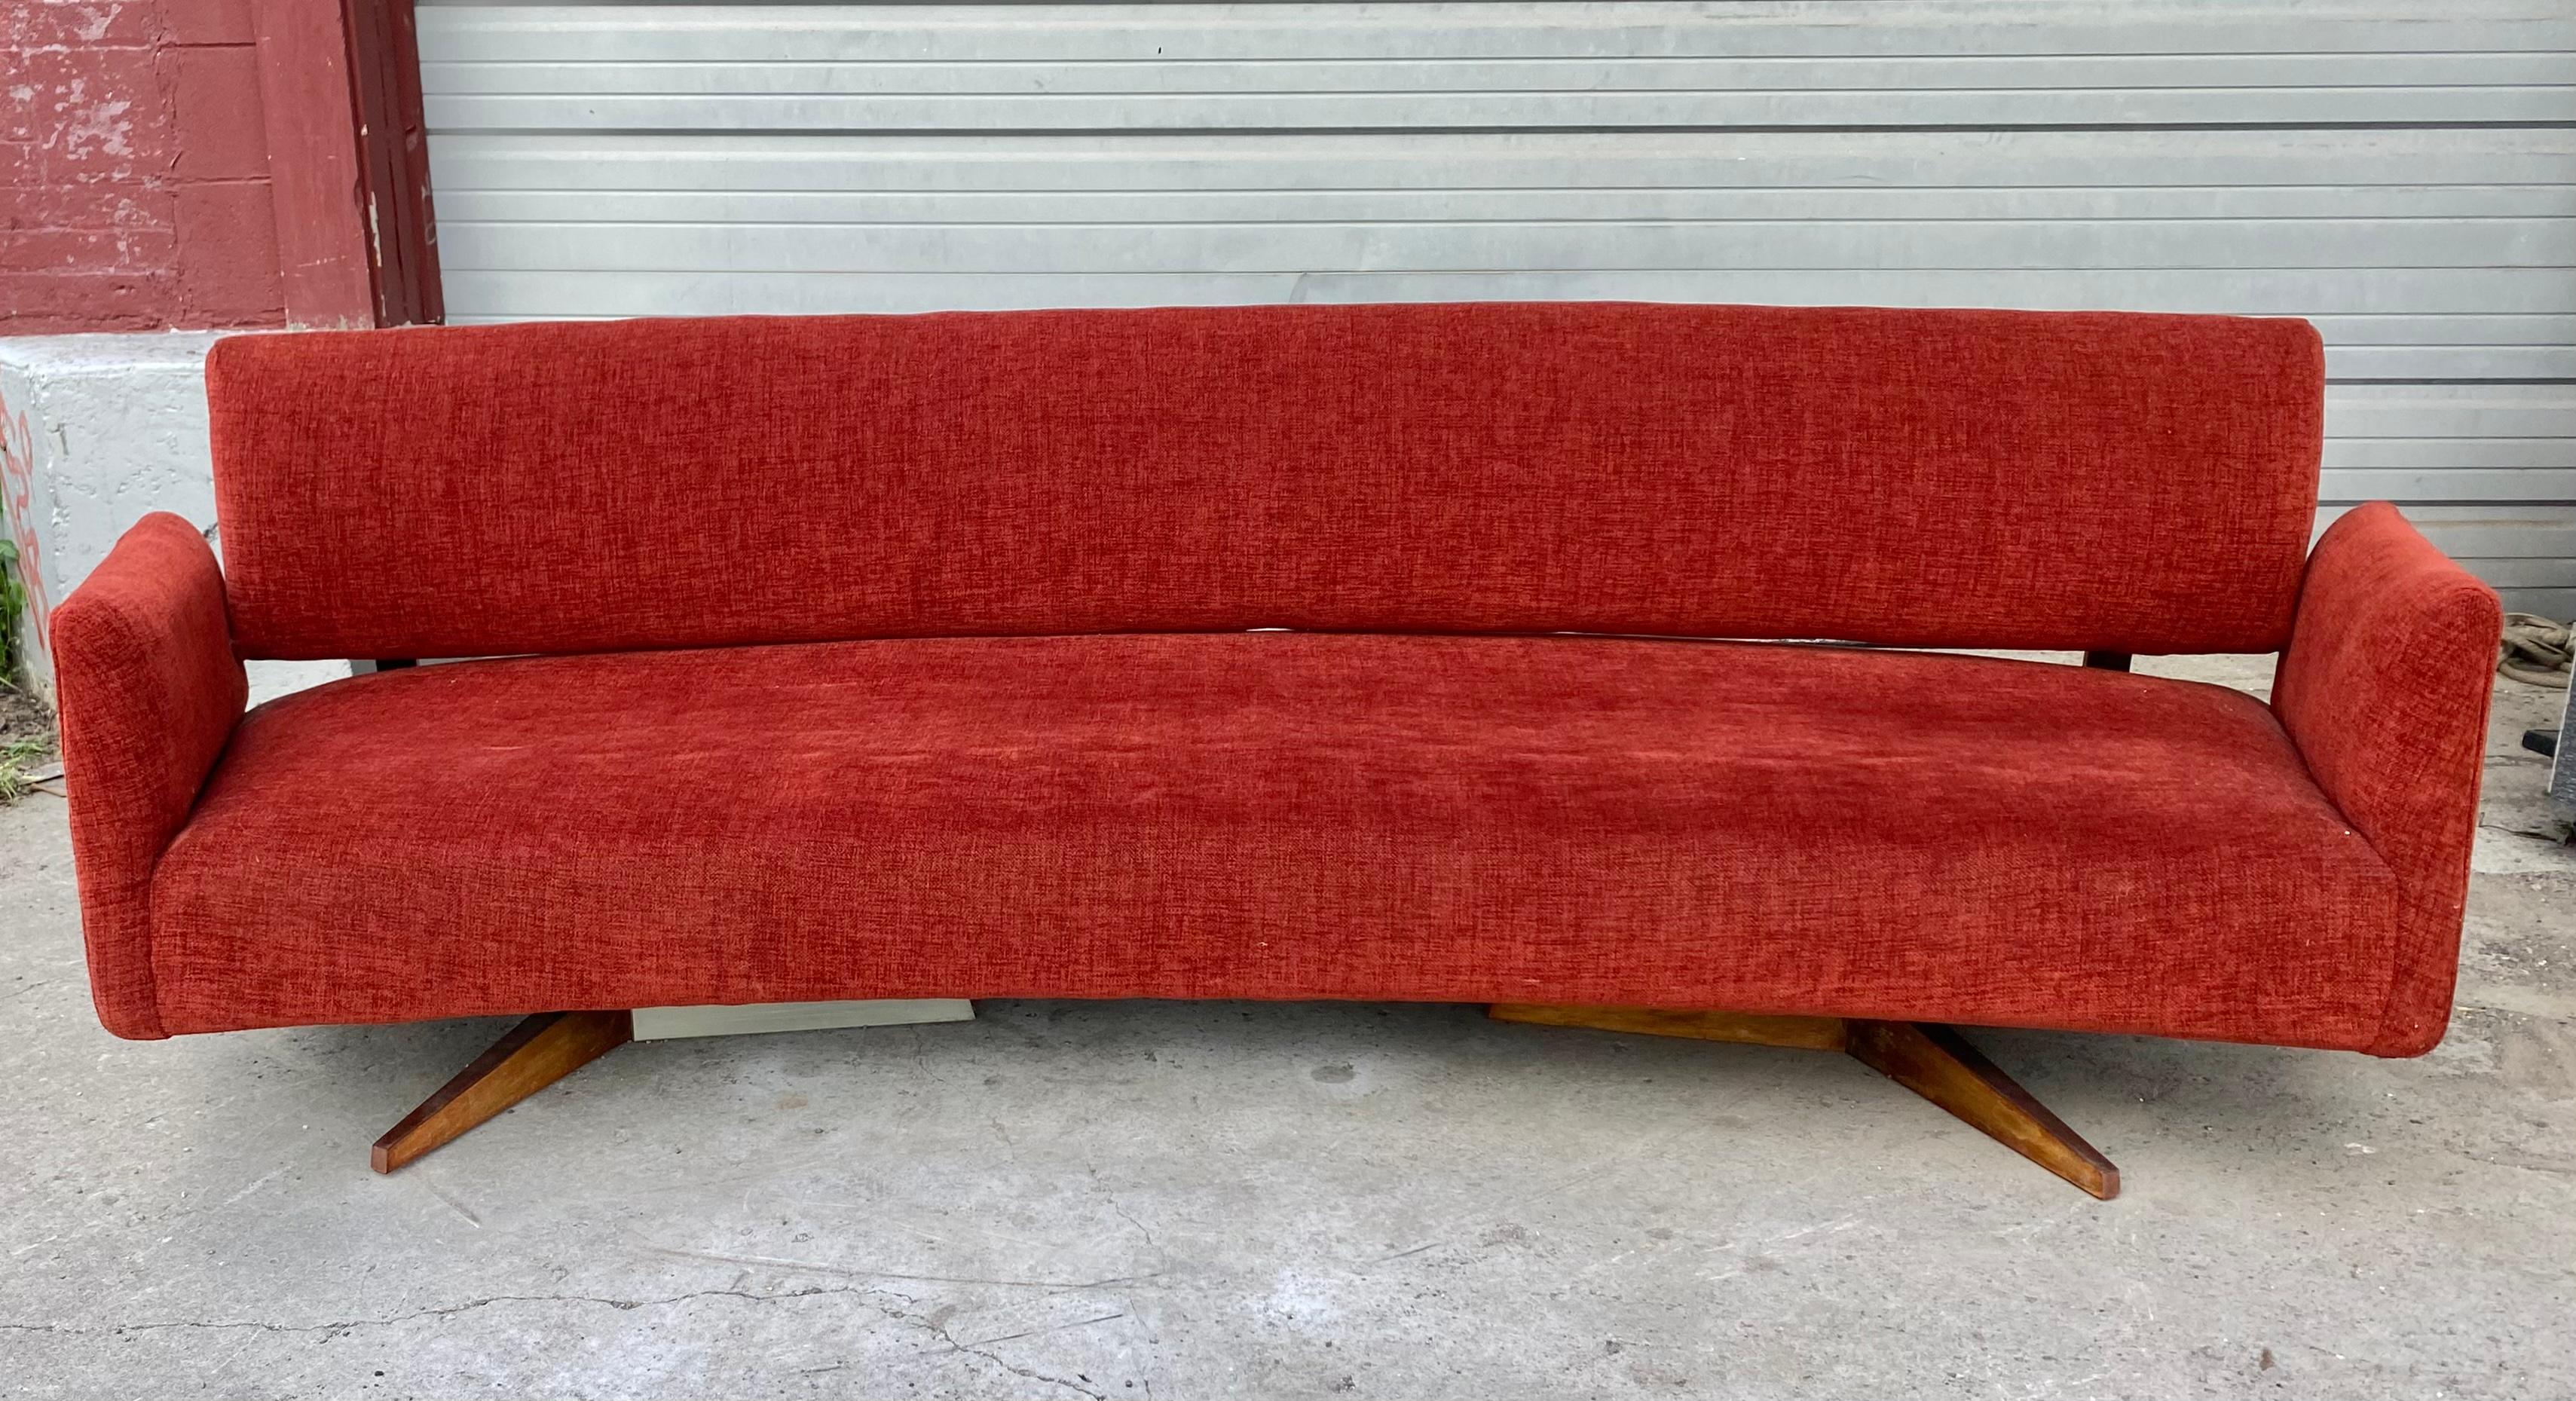 Stunning Mid Century Modern Sofa attributed to Jens Risom..Amazing style and design.. Unusual star base's ,Recently reupholstered,Extremely comfortable,,Hand delivery avail to New York City or anywhere en route from Buffalo NY